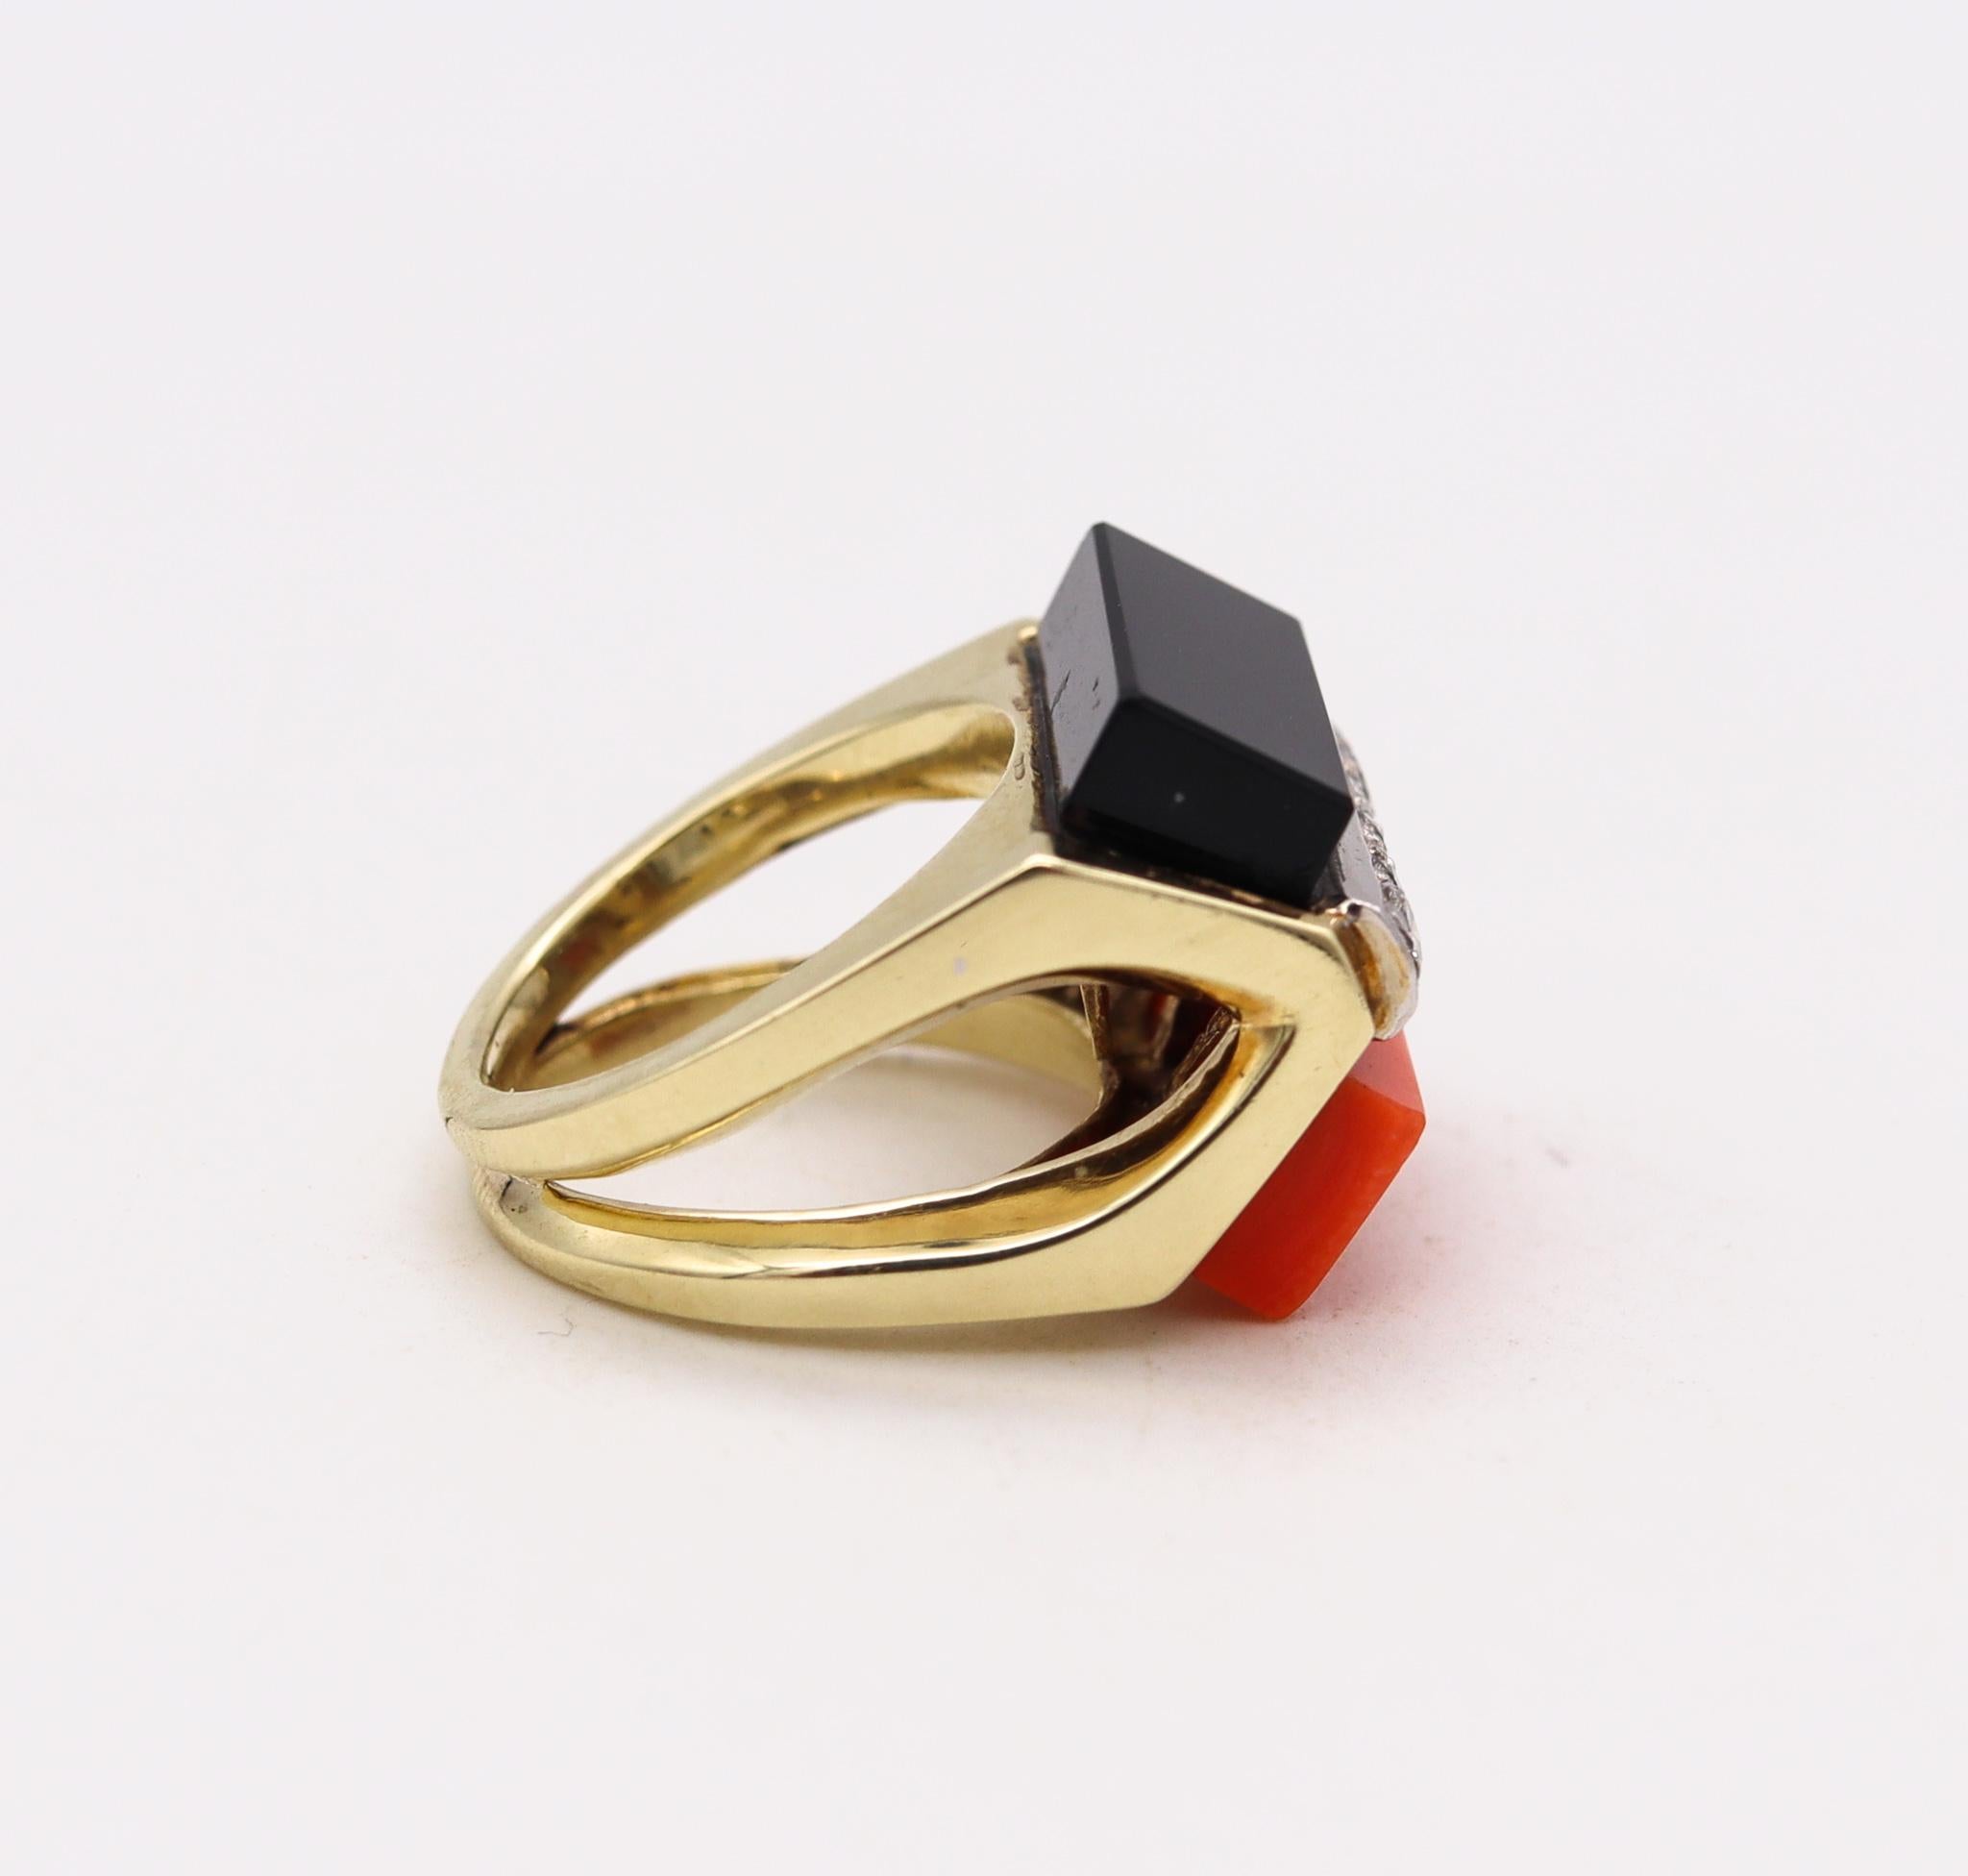 La Triomphe Geometric Cocktail Ring in 18Kt Gold with Diamonds Coral Onyx In Excellent Condition For Sale In Miami, FL